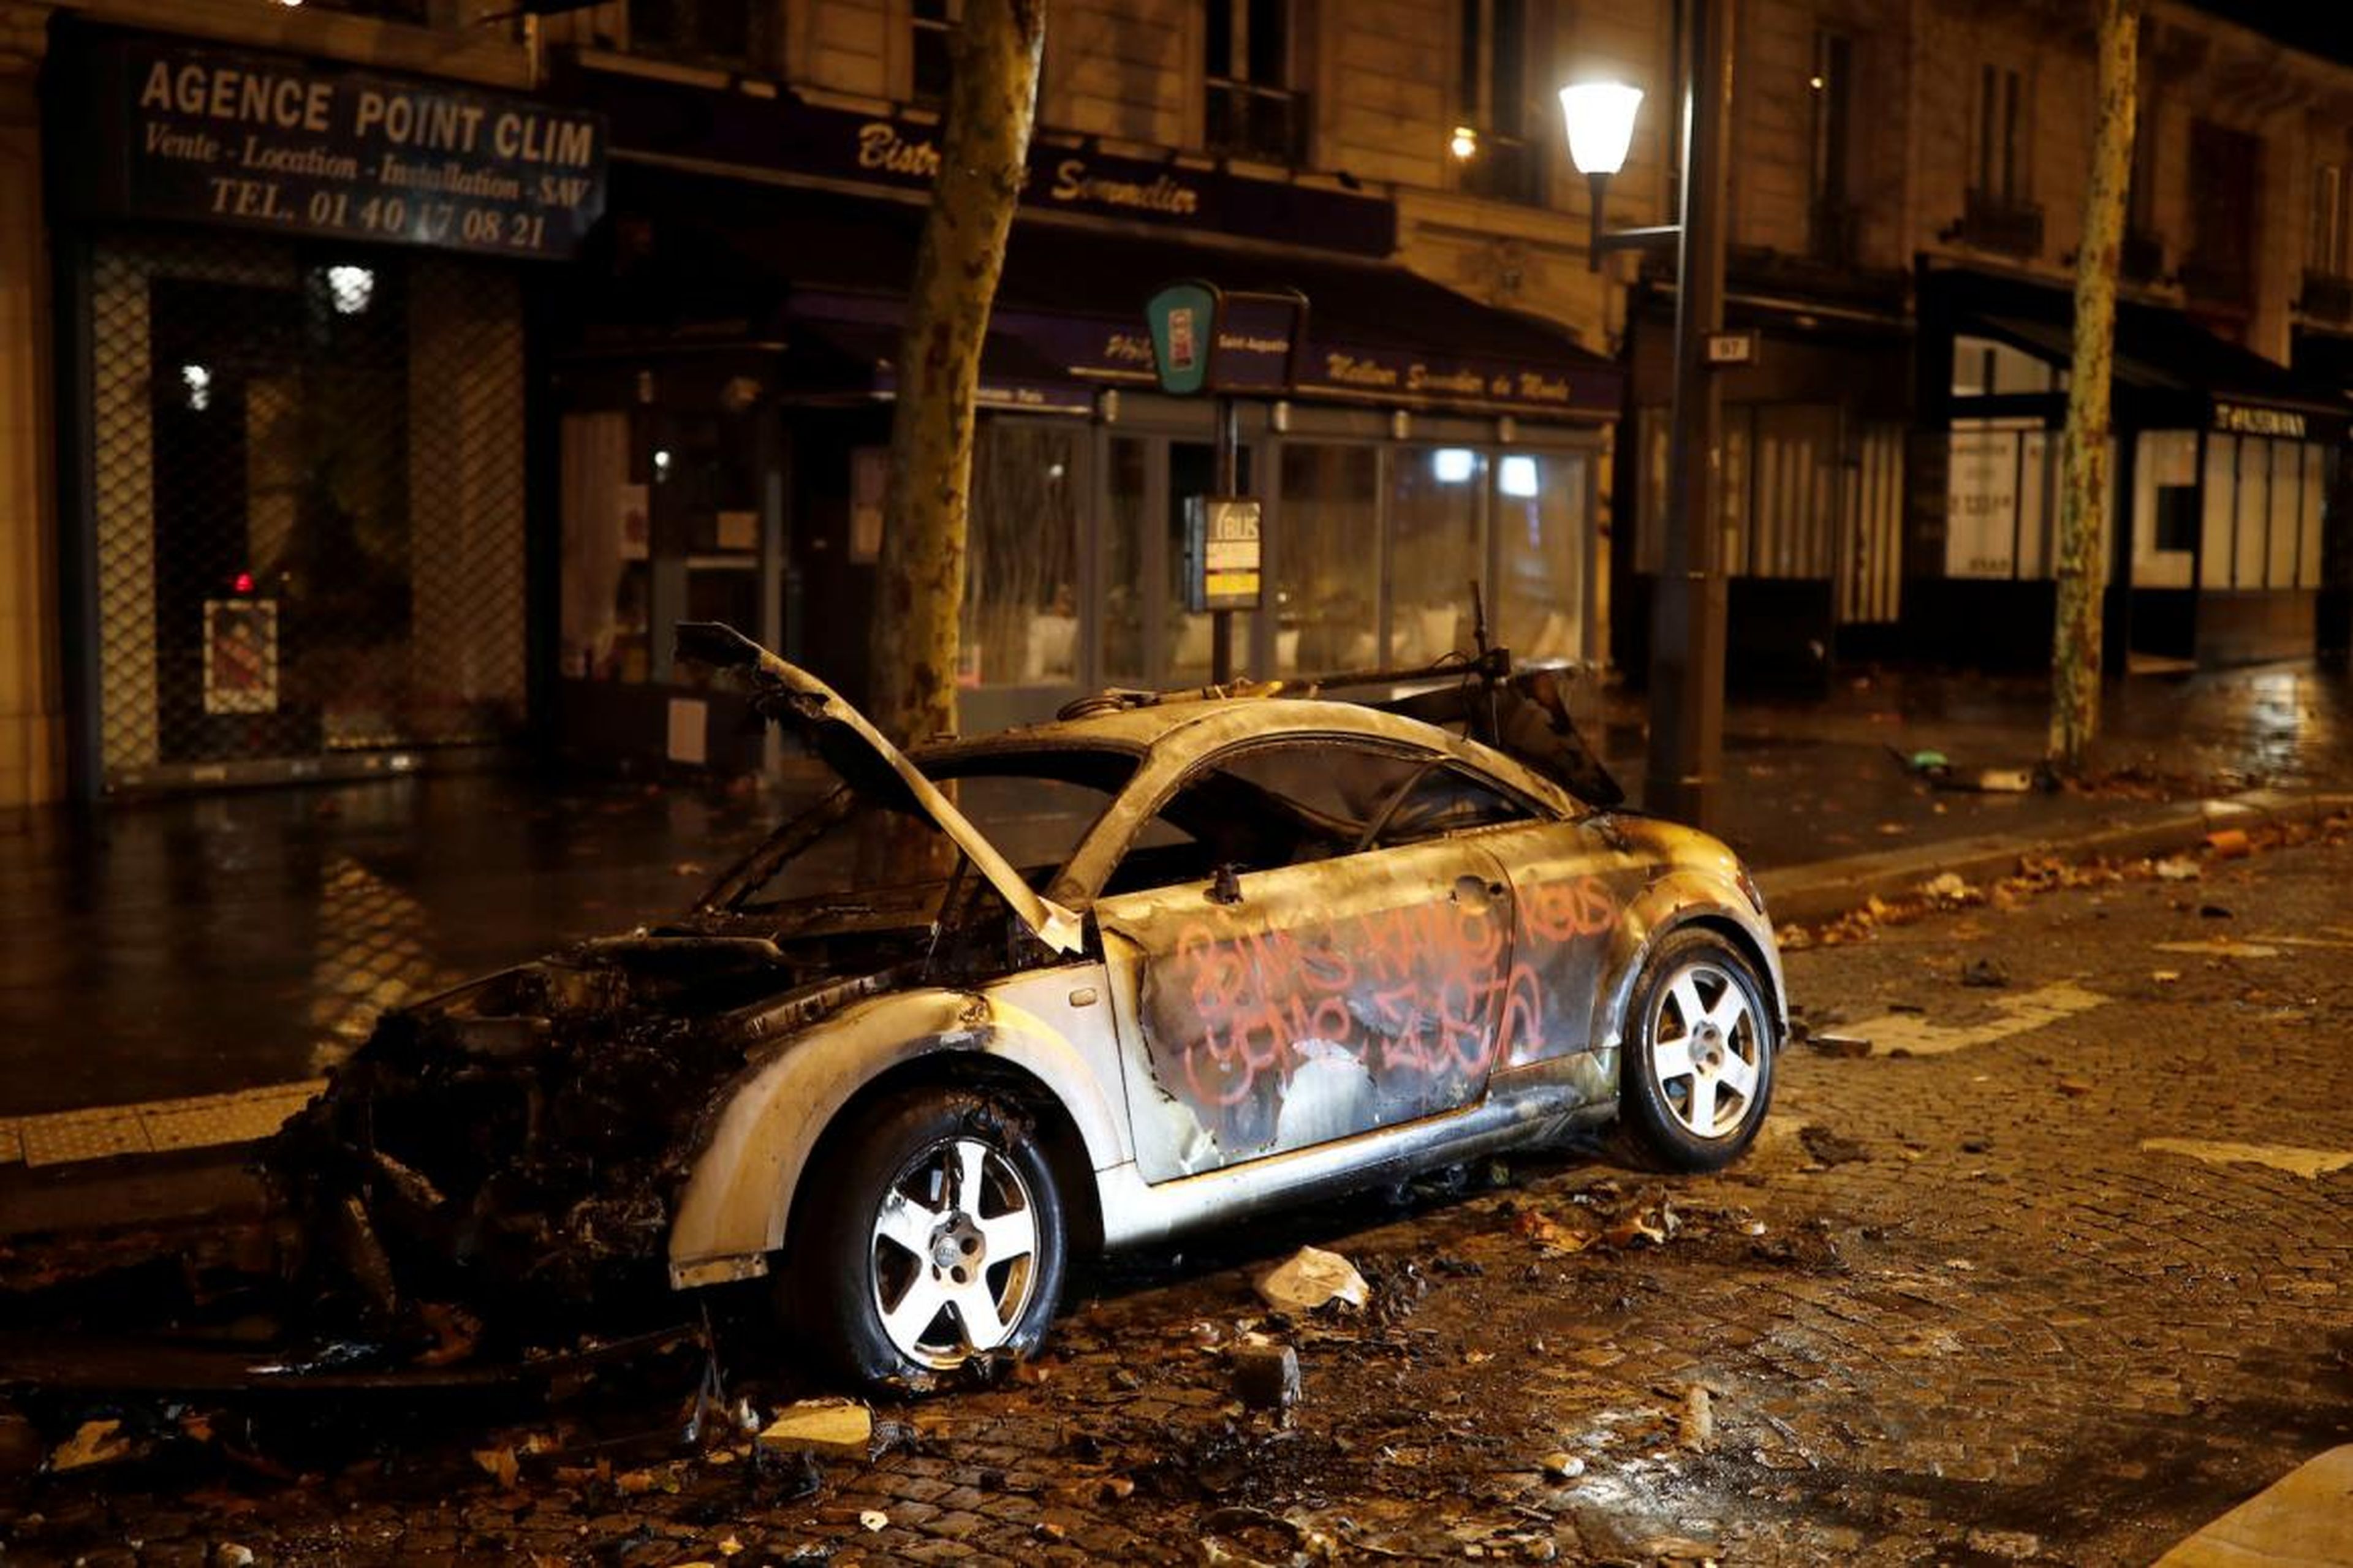 The streets were left lined with vandalized and torched cars.